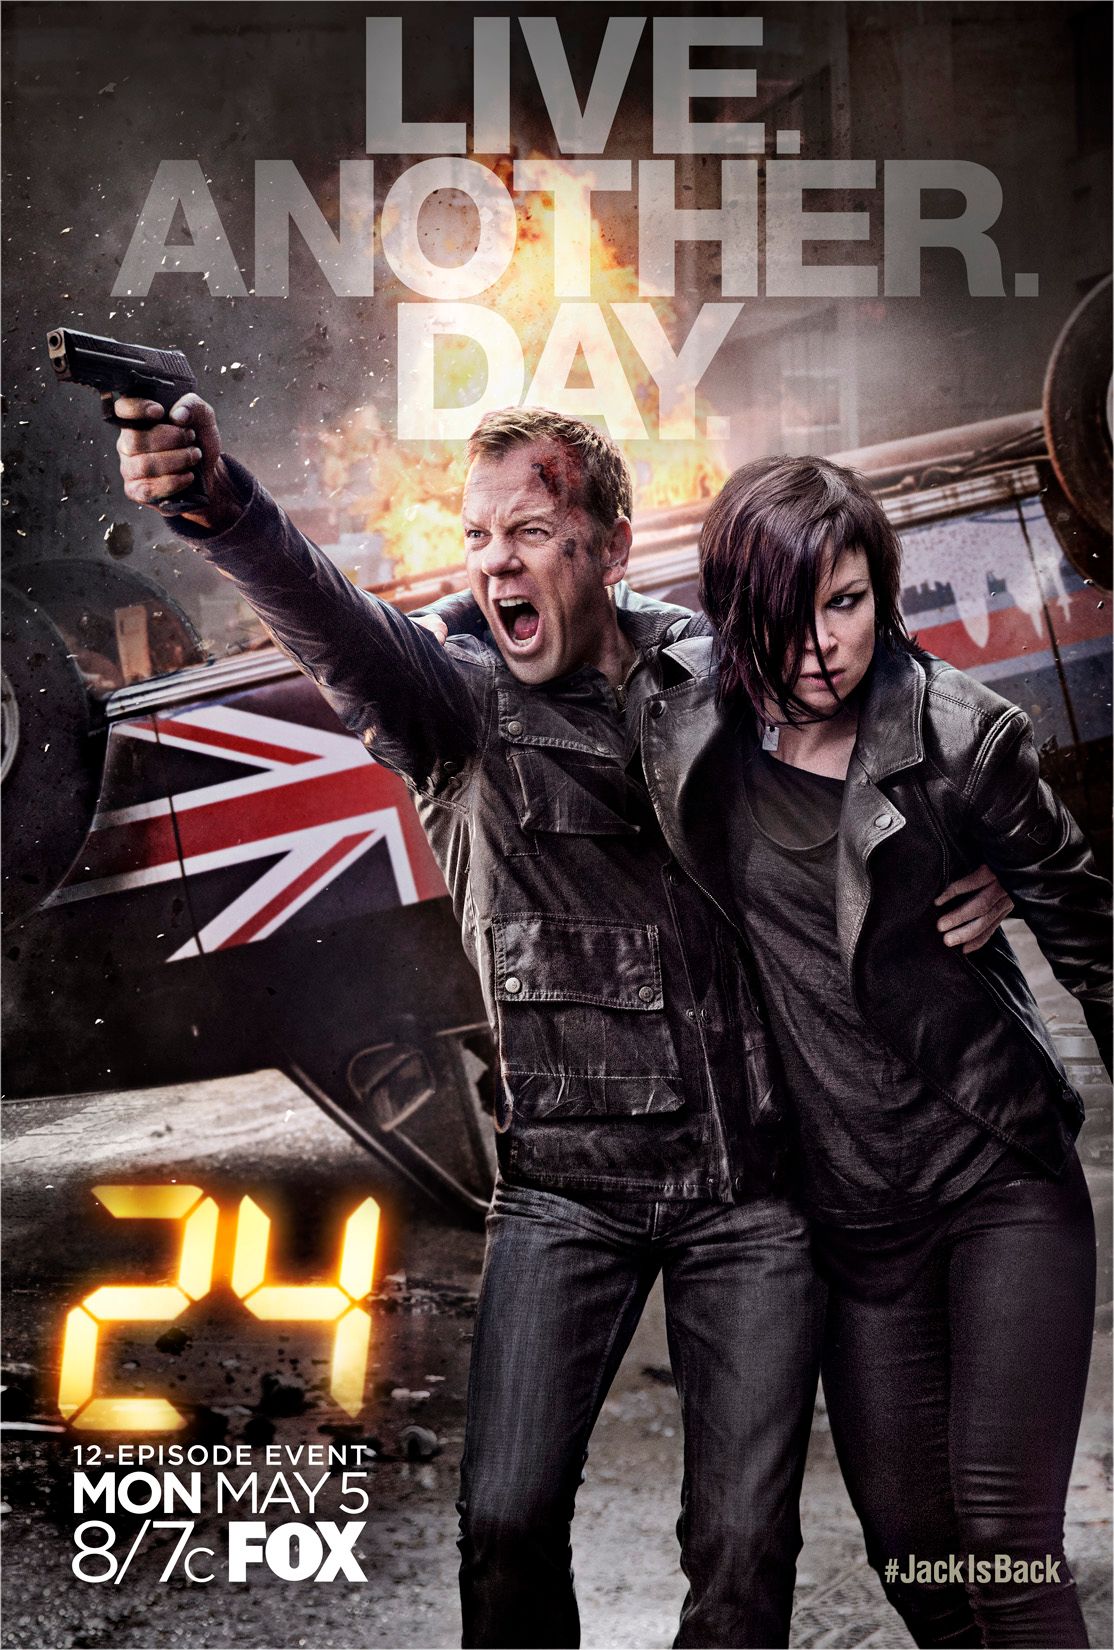 24: Live Another Day Promo Art